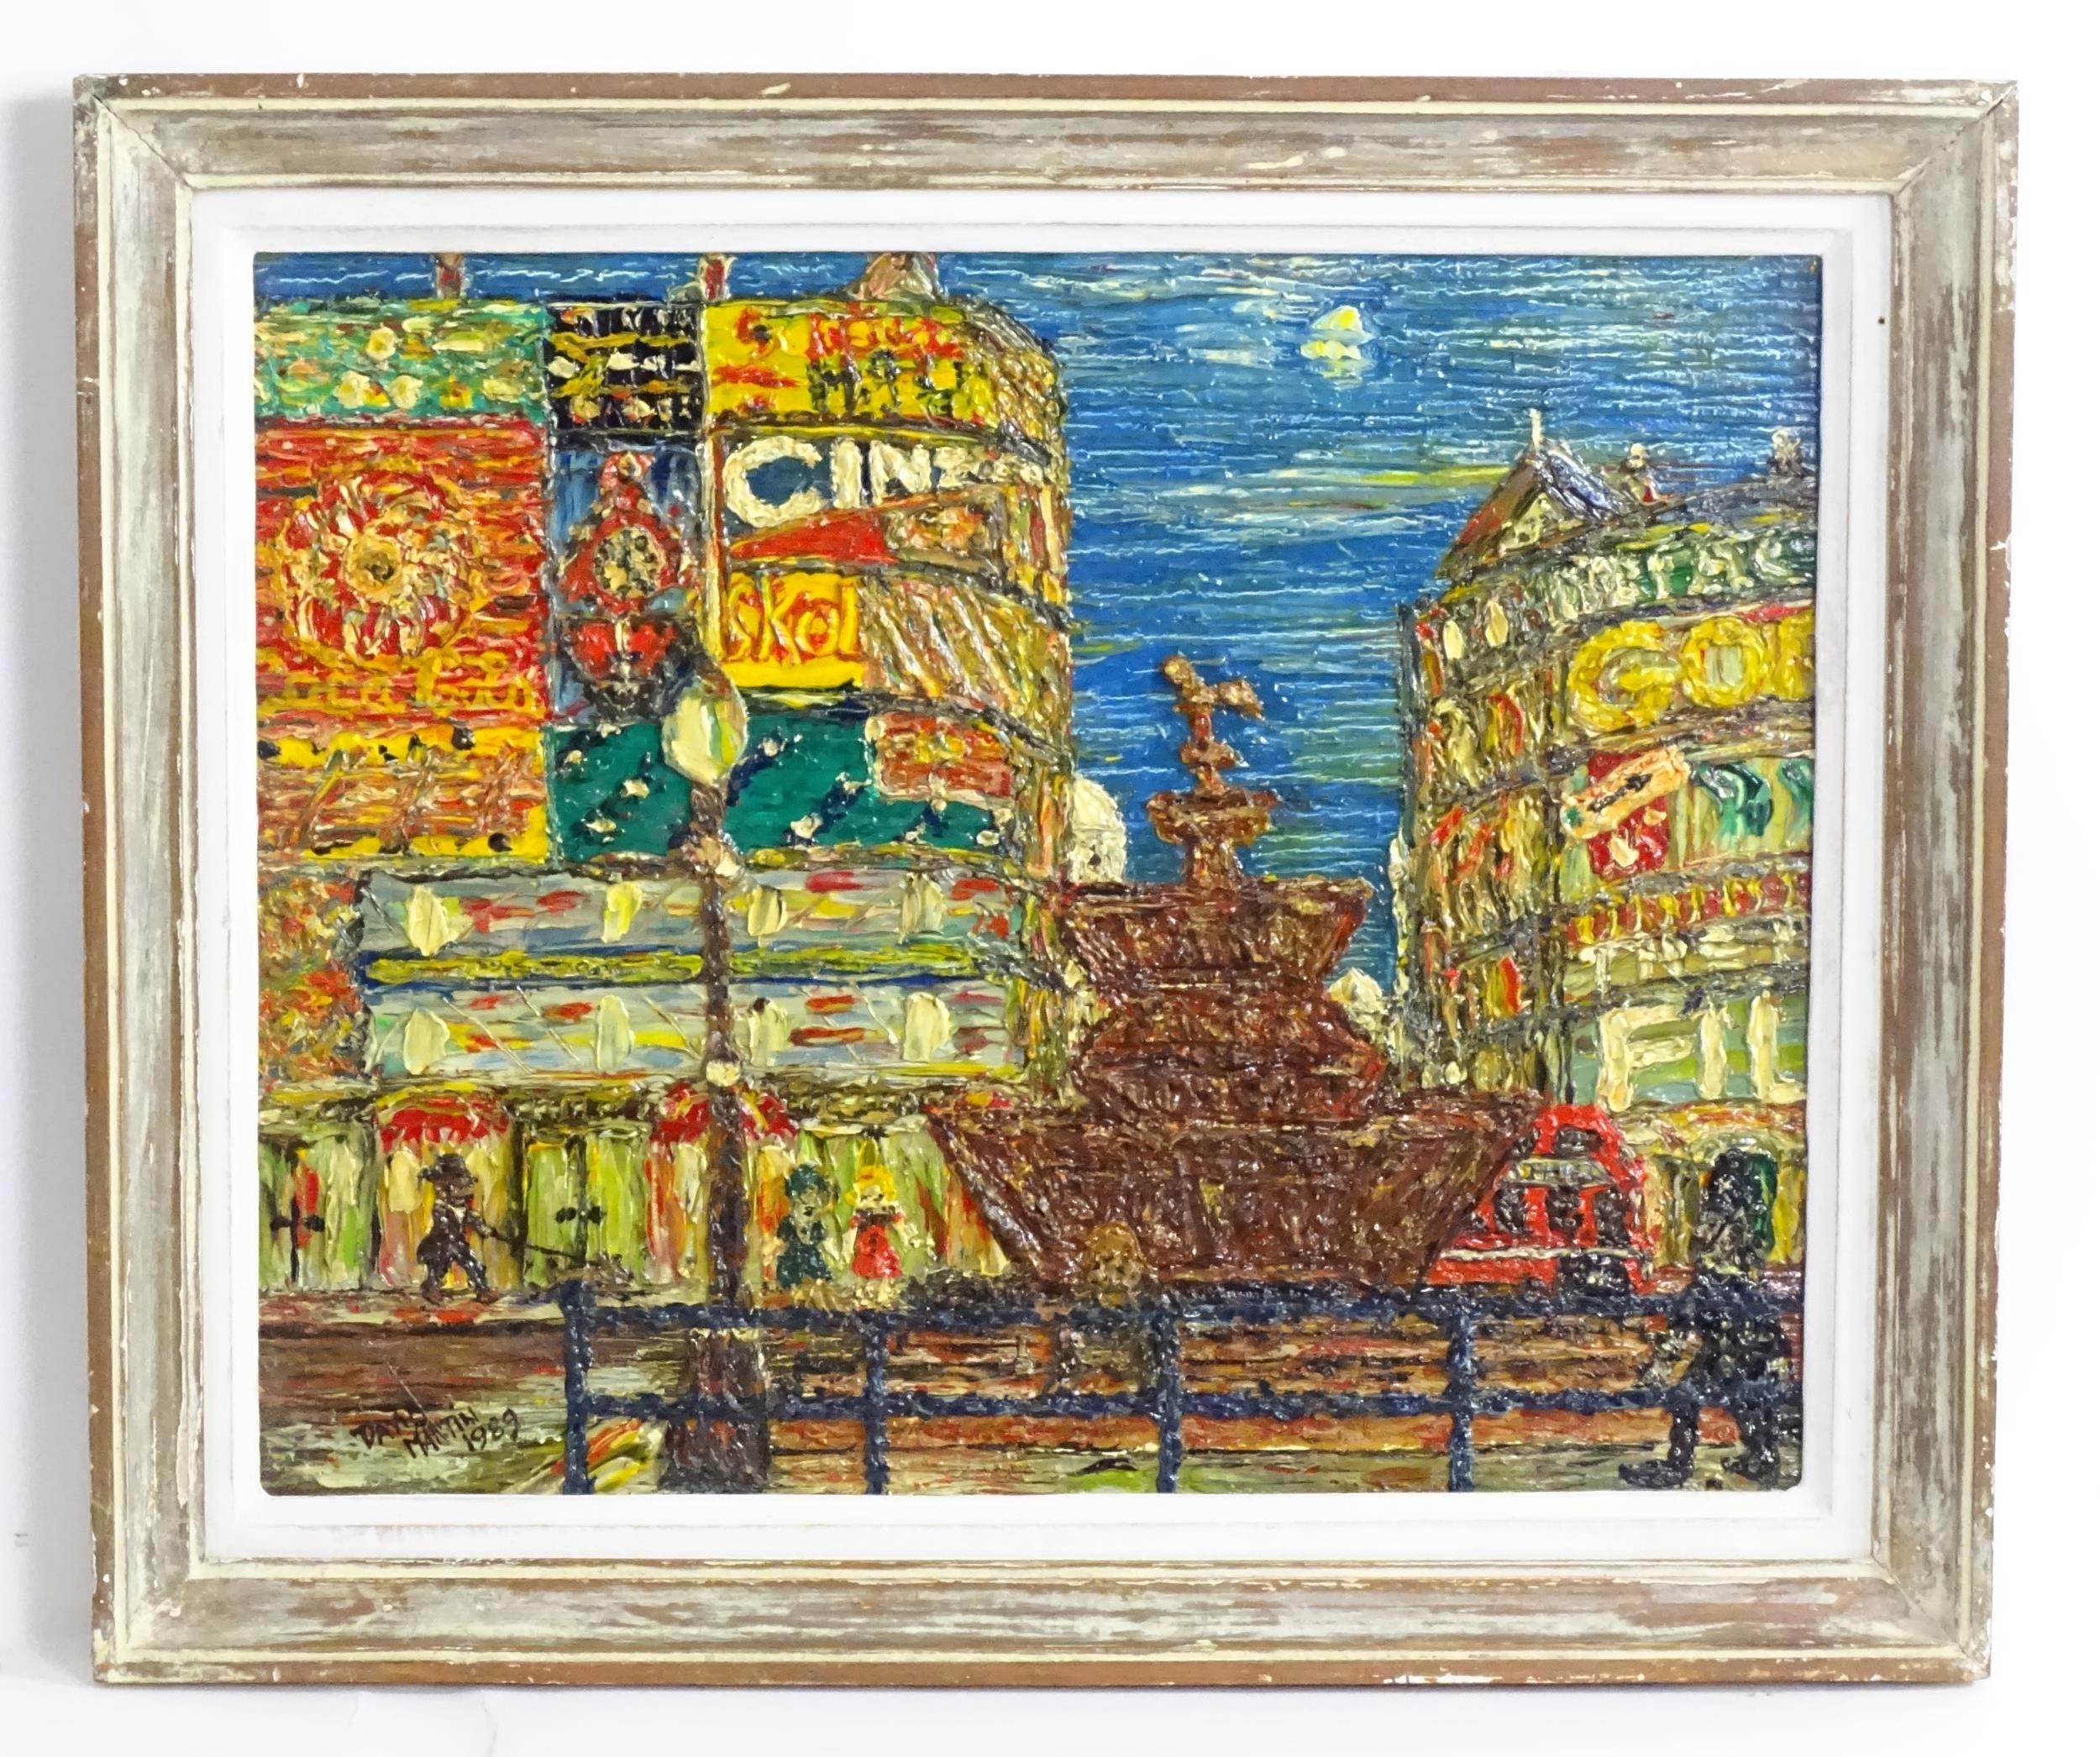 David Martin, 20th century, Oil on board, A London street scene depicting Piccadilly Circus and